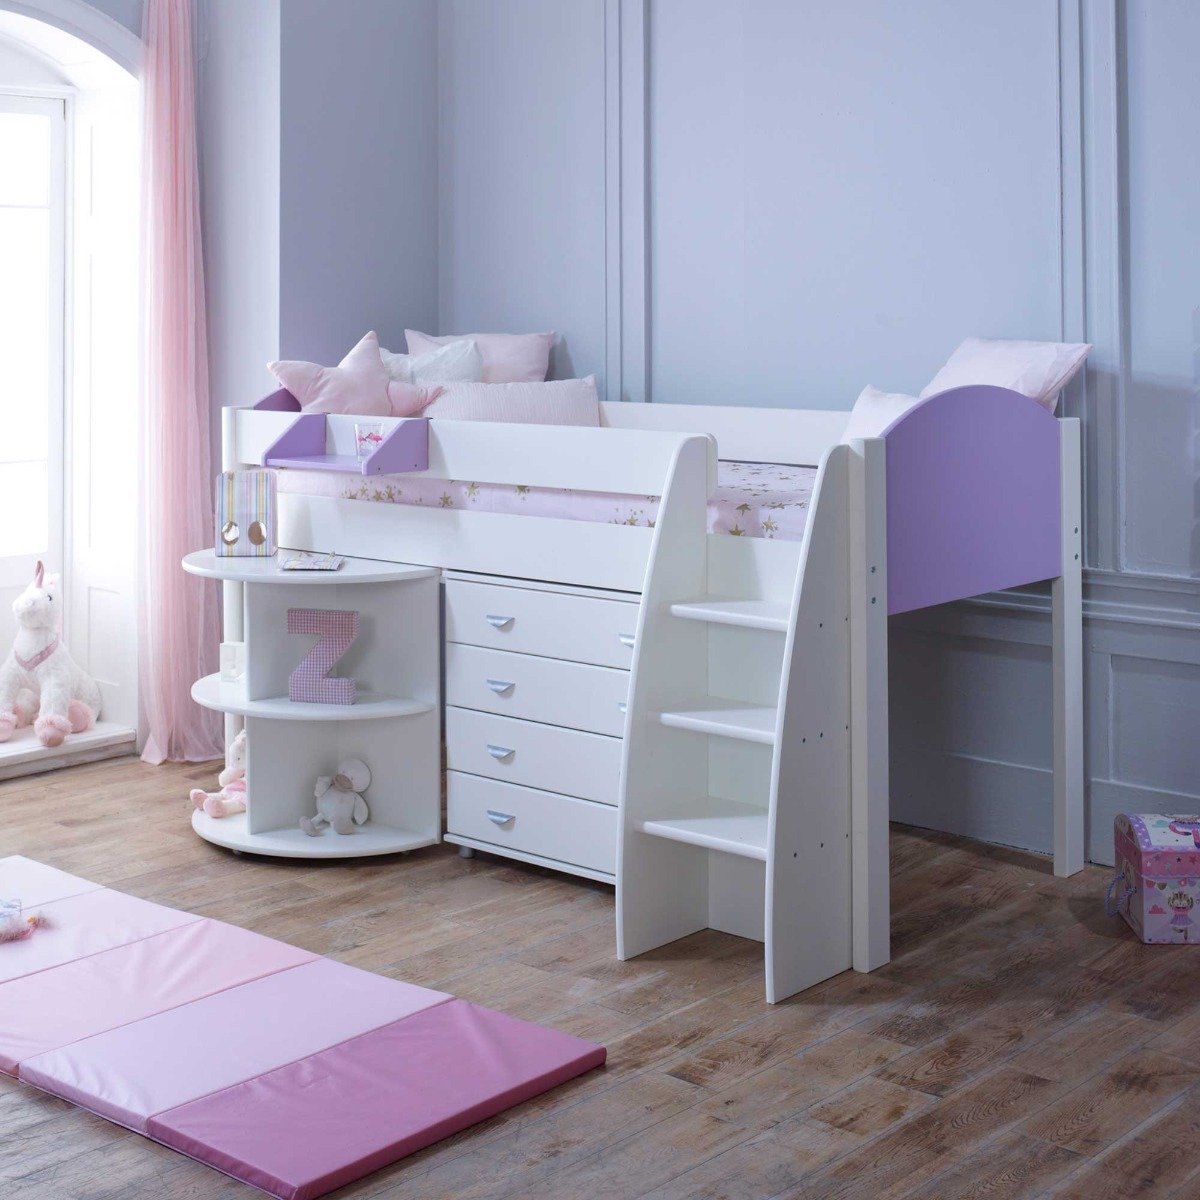 Eli Single Midsleeper With Pull Out Desk, Purple | Barker & Stonehouse